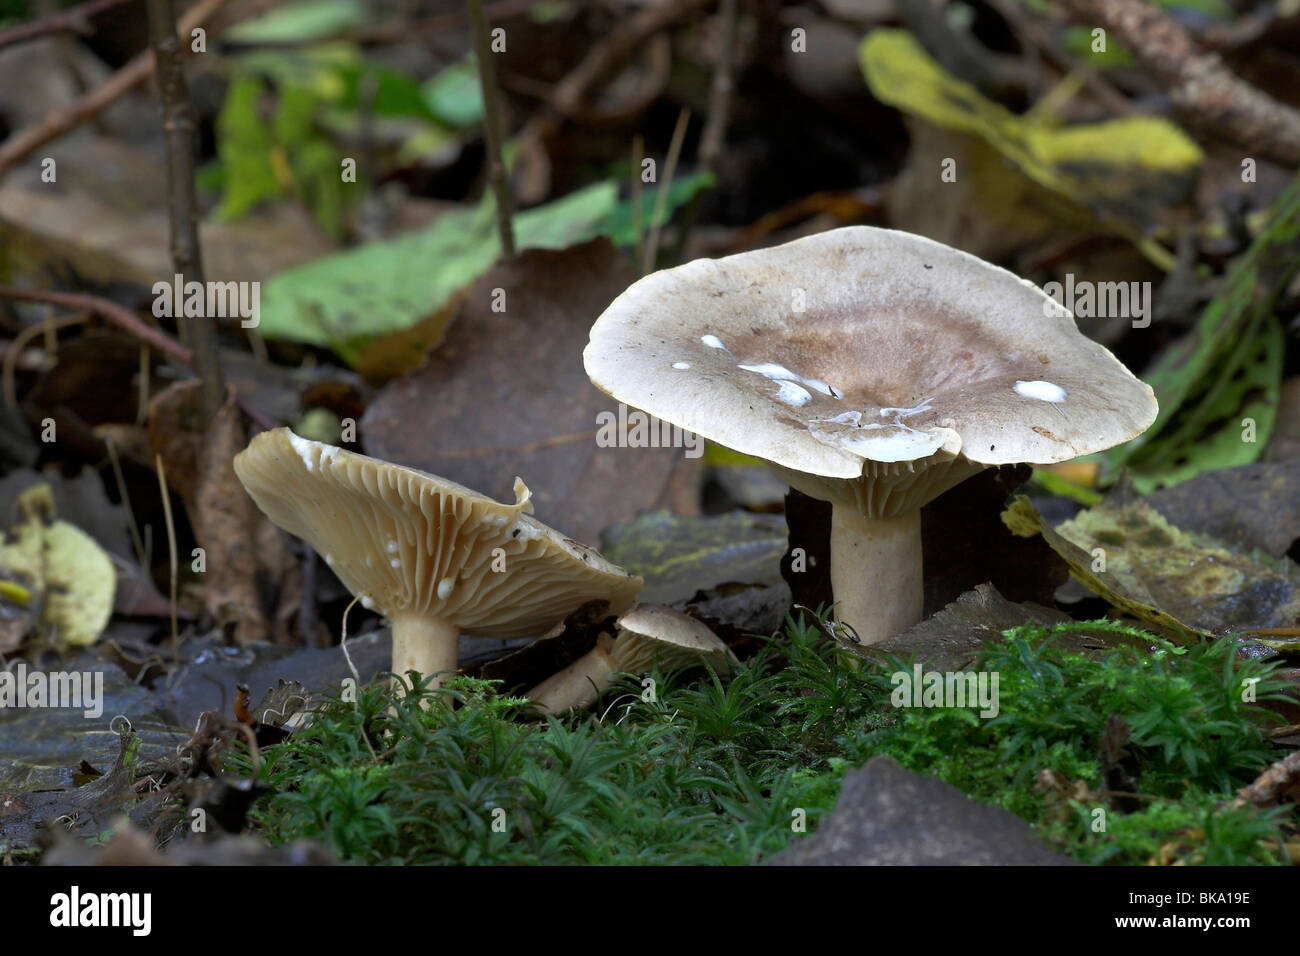 Lactarius hortensis on moss between leaves Stock Photo